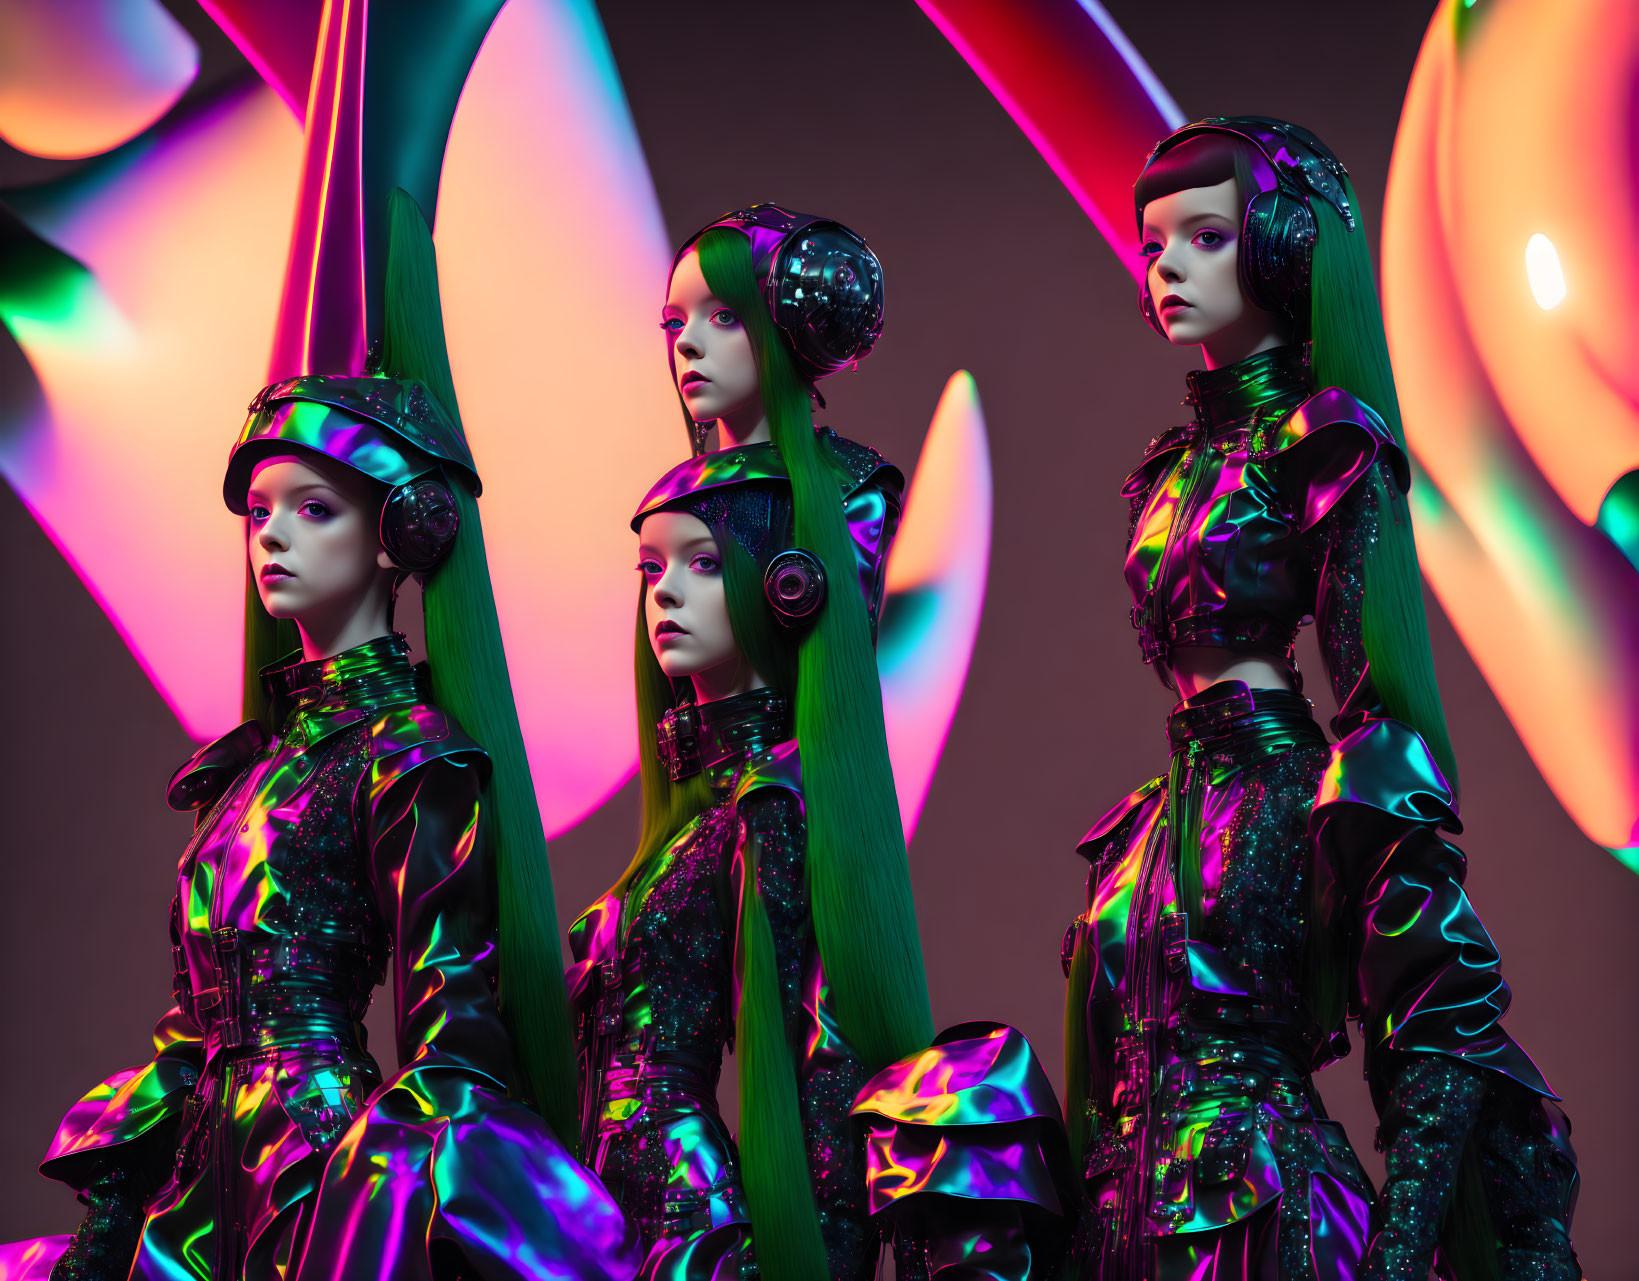 Four futuristic mannequins in glossy outfits and elaborate headpieces against colorful abstract backdrop